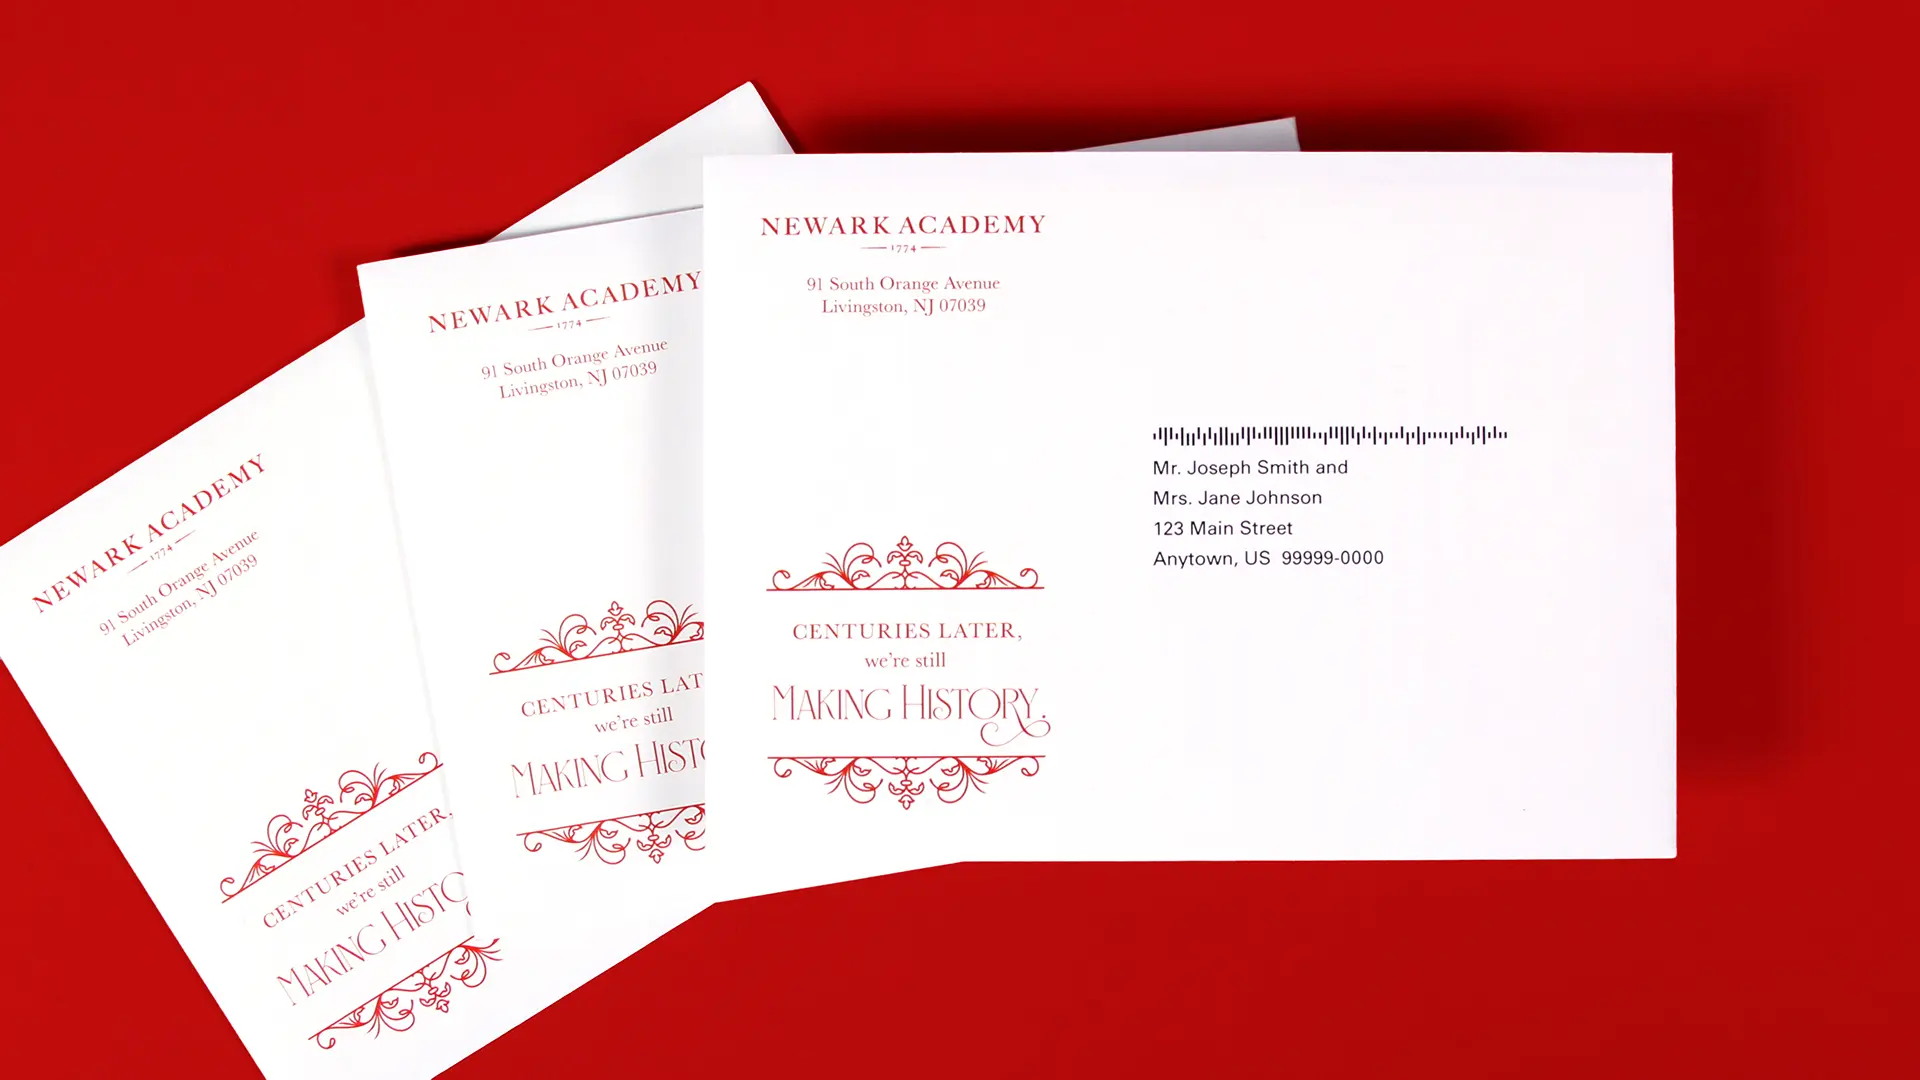 Outer envelopes with a red flourishing design around the campaign name.